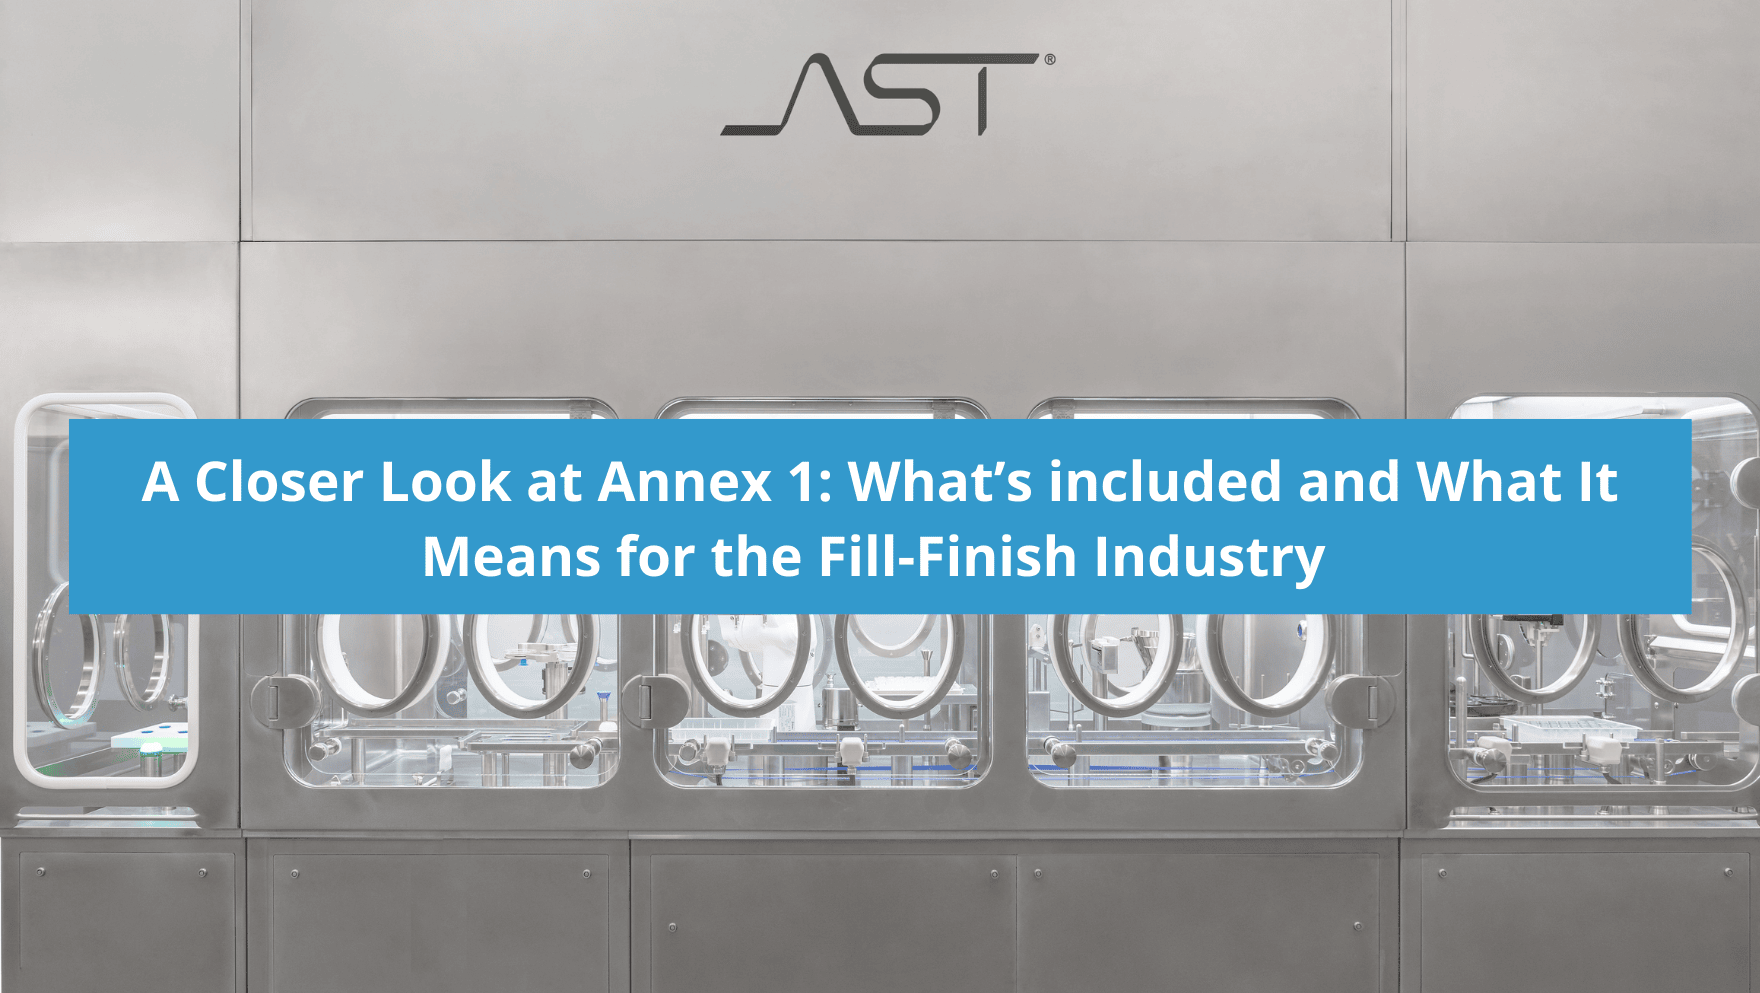 A Closer Look at the New Annex 1: What’s included and What It Means for the Fill-Finish Industry